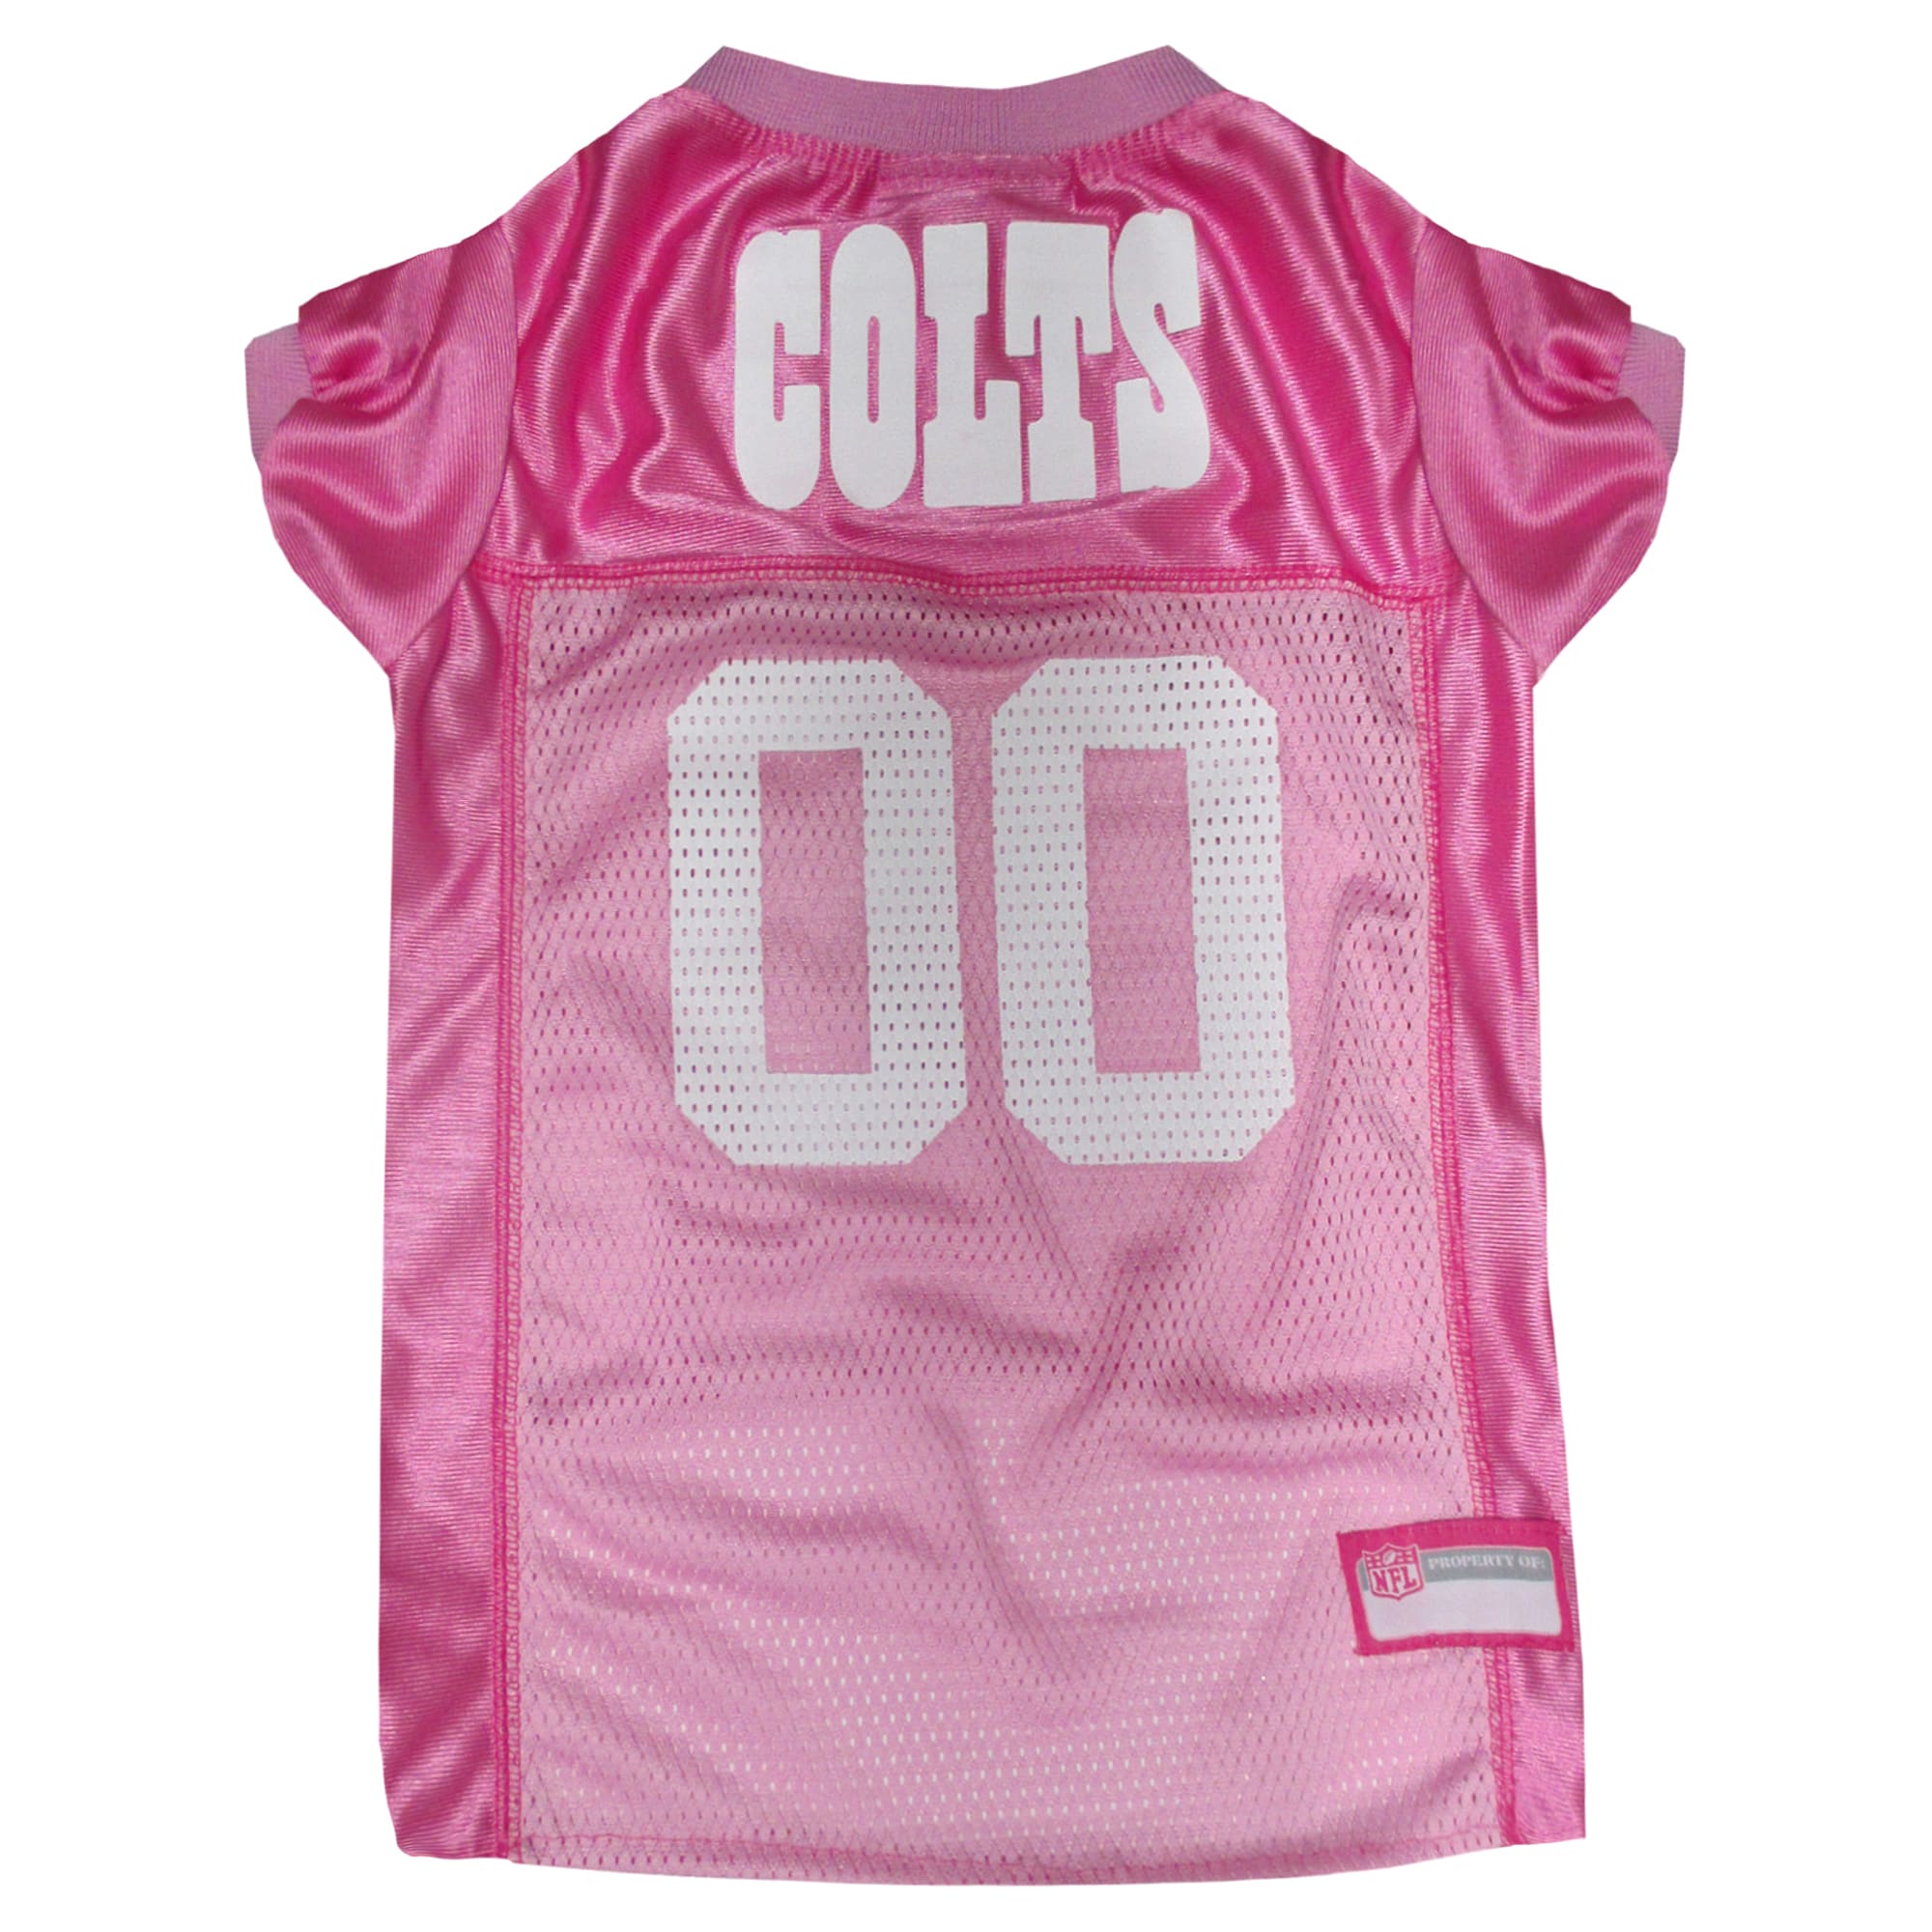 Indianapolis Colts NFL Pink Mesh Jersey 